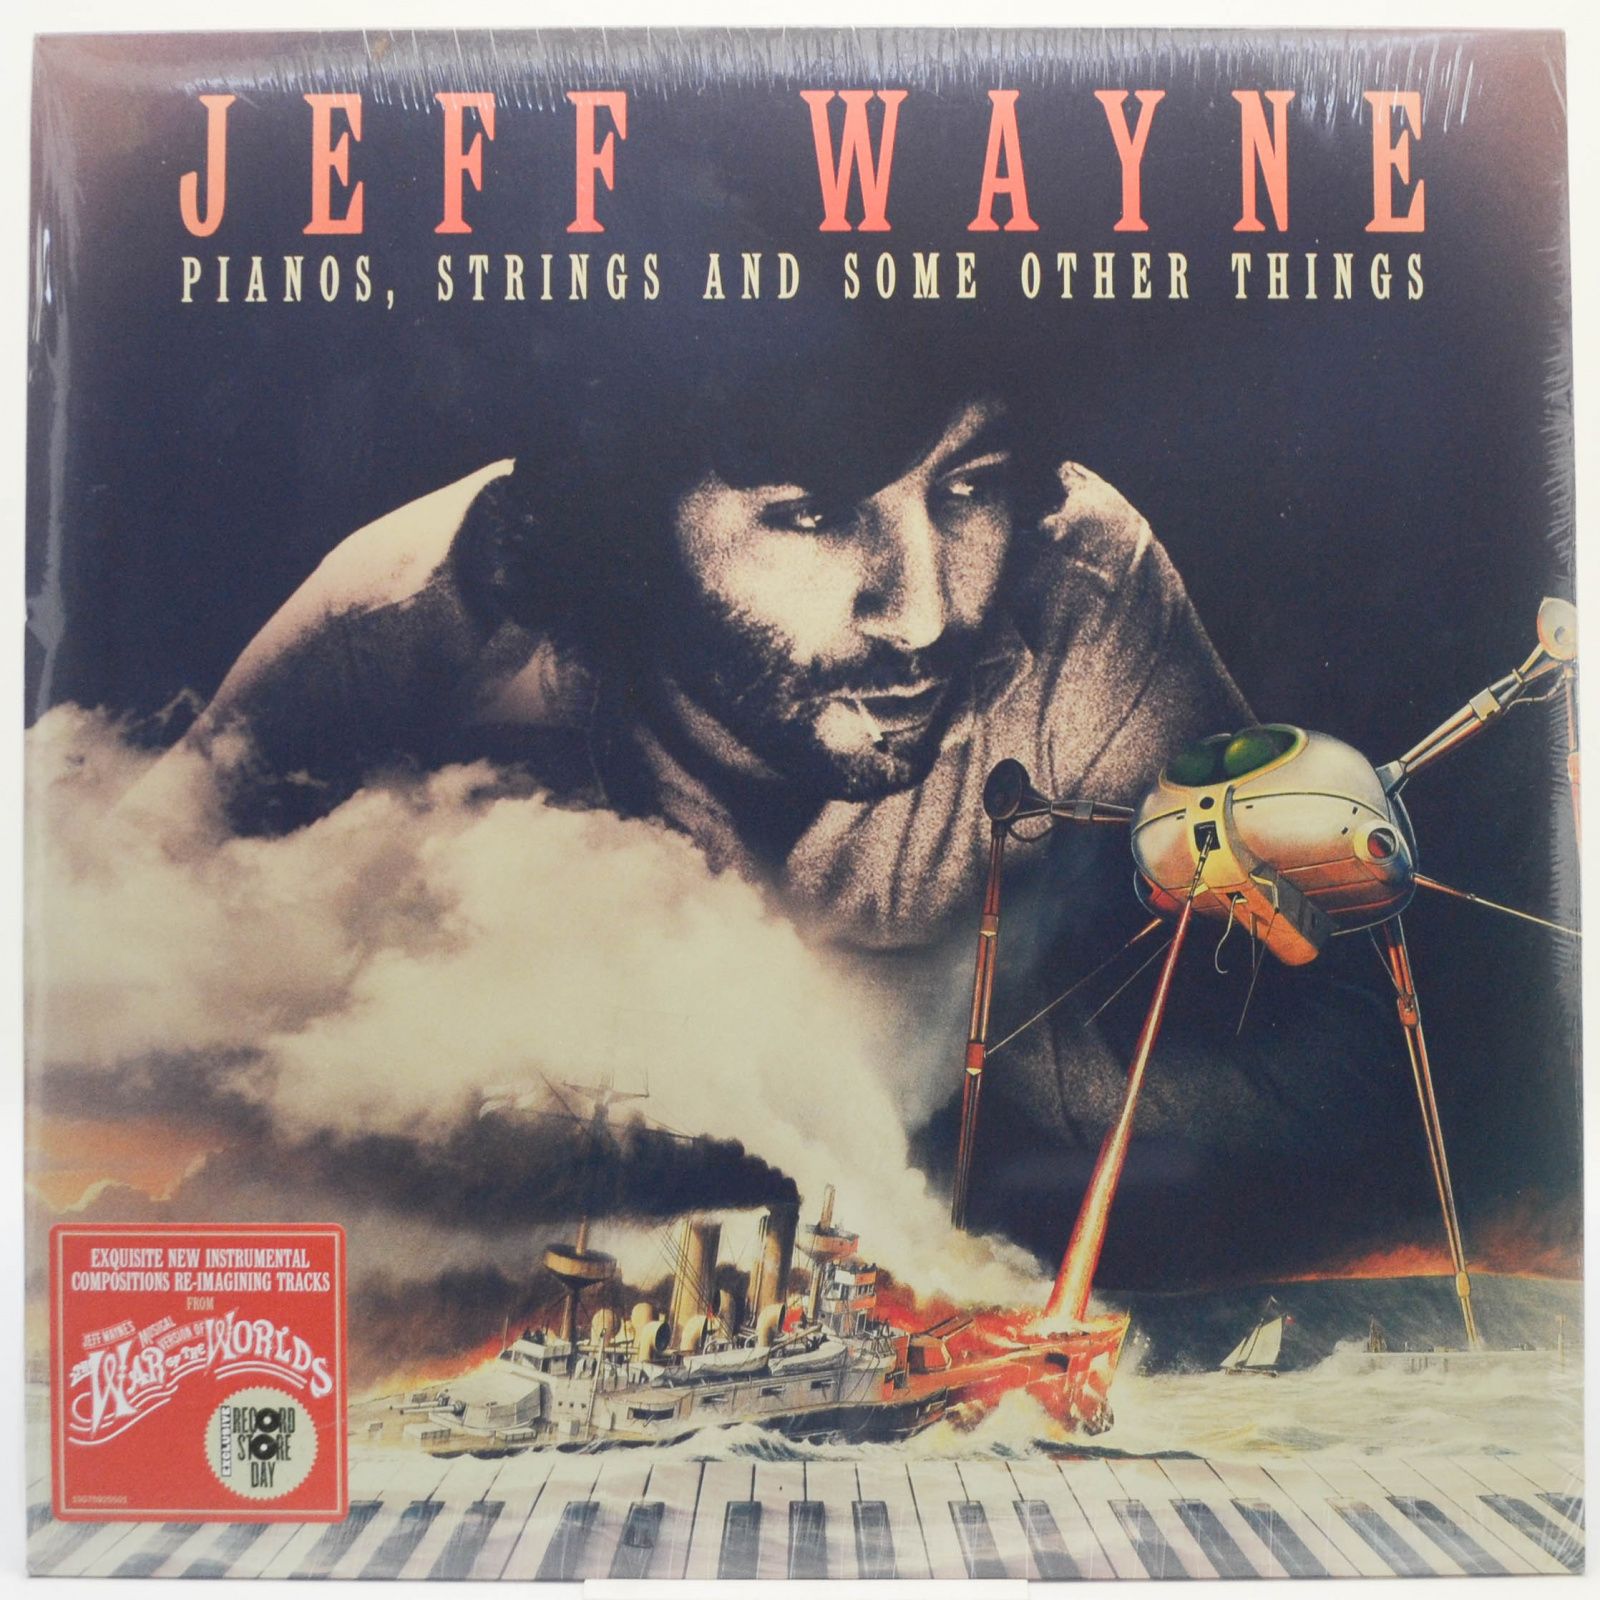 Jeff Wayne — Pianos, Strings And Some Other Things, 2019